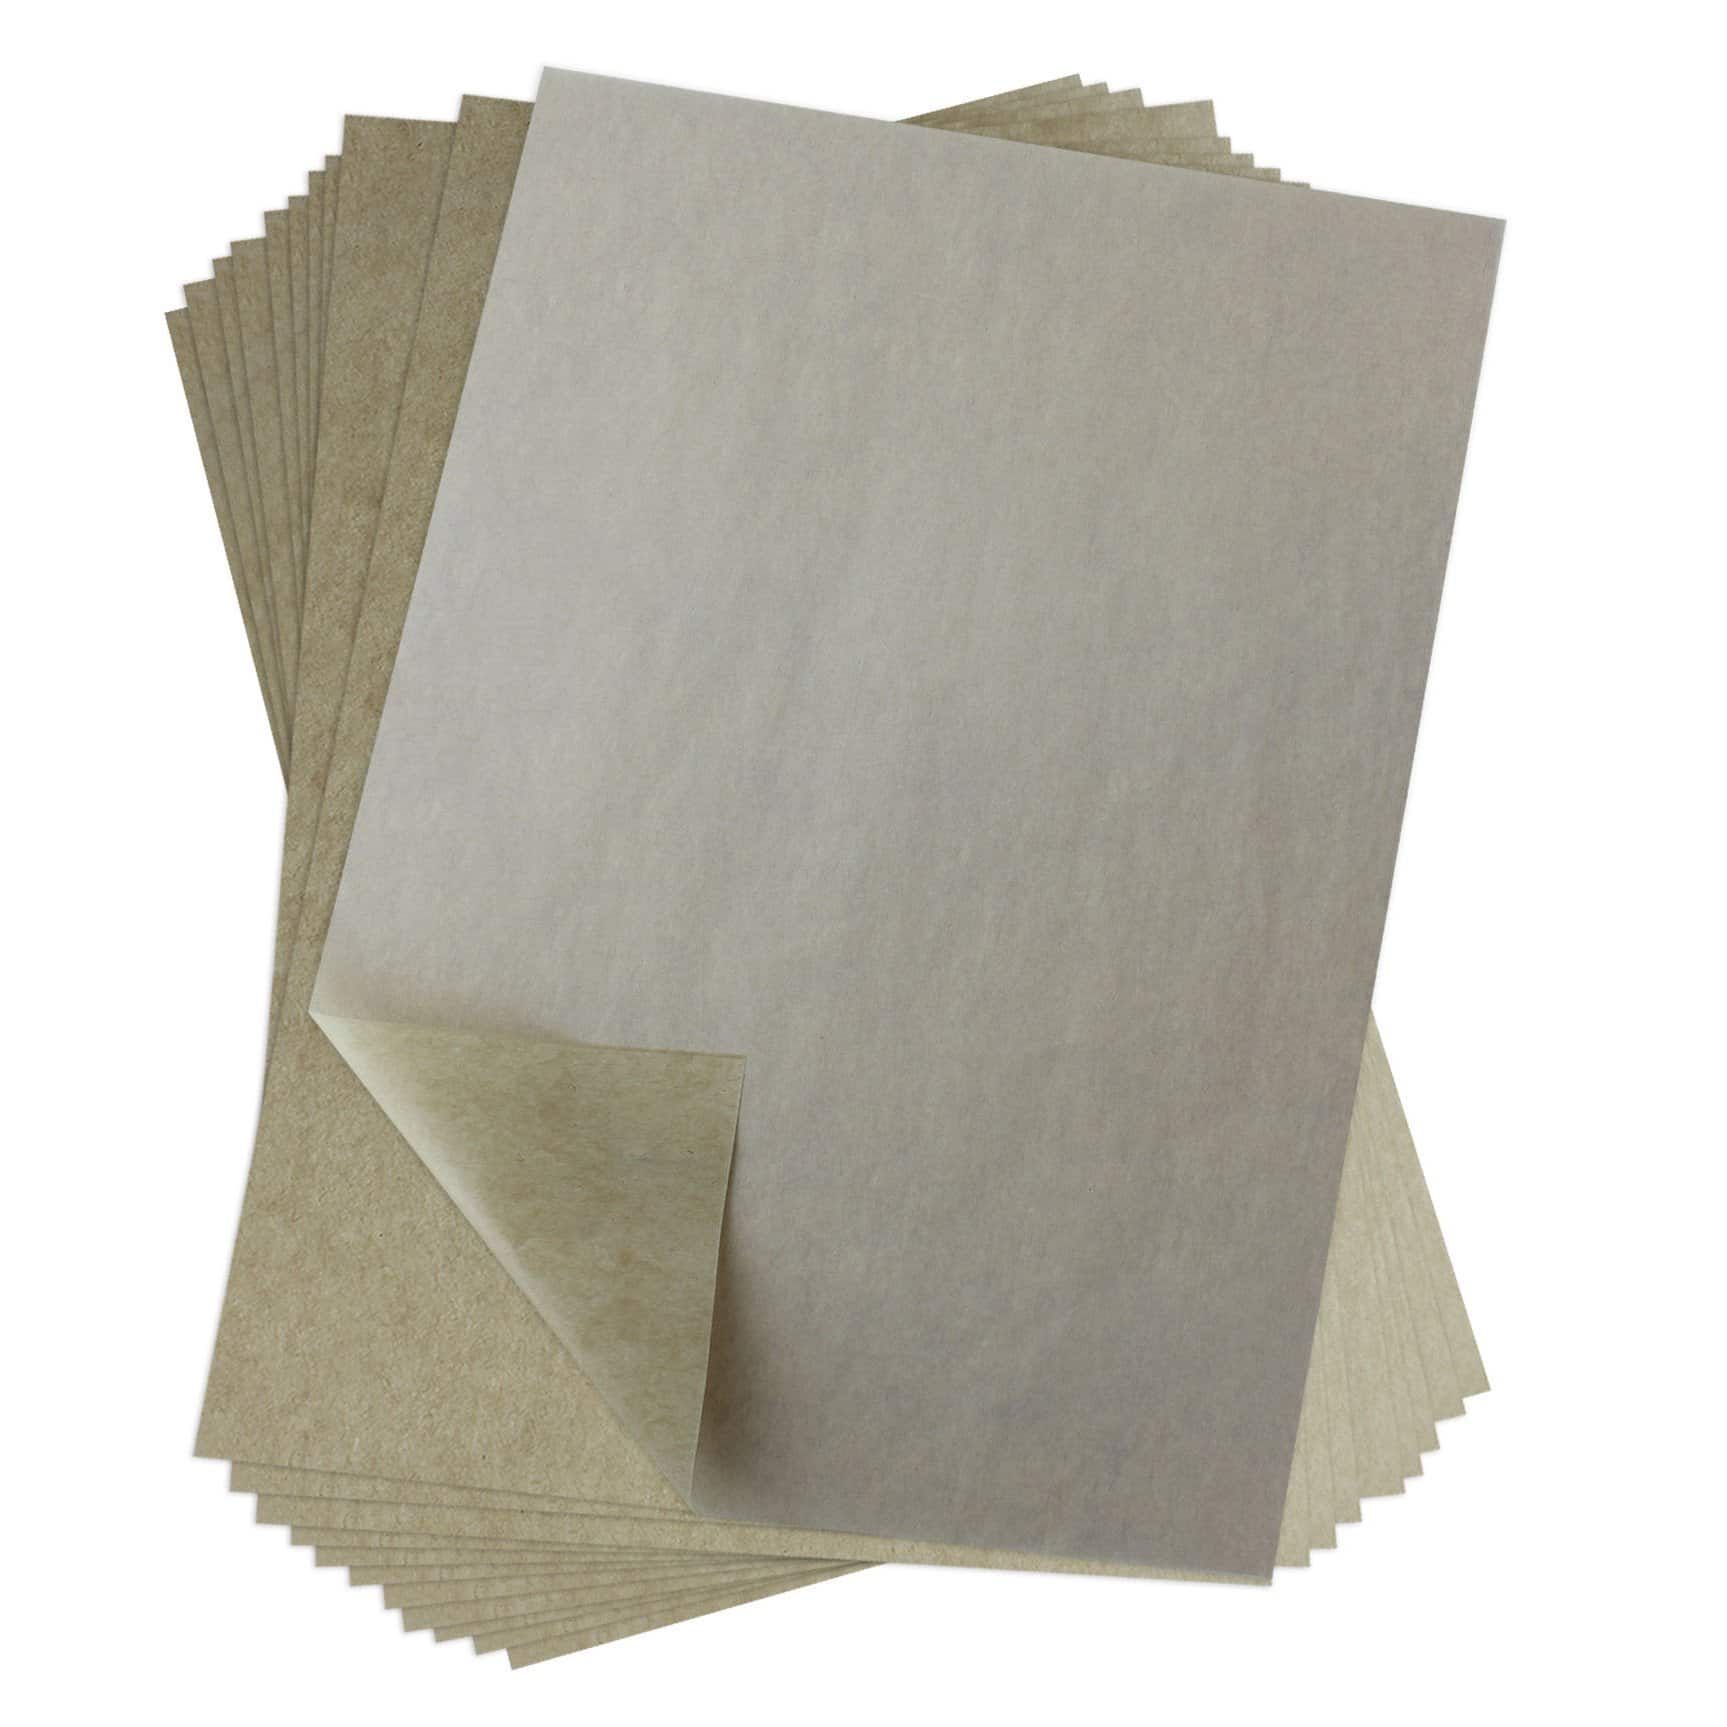  32 Sheets Copy Paper Translucent tracing Paper Graphite  Transfer Paper Transfer Paper for Painting tracing Paper for Sewing Embroidery  Transfer Paper Manual White Describe